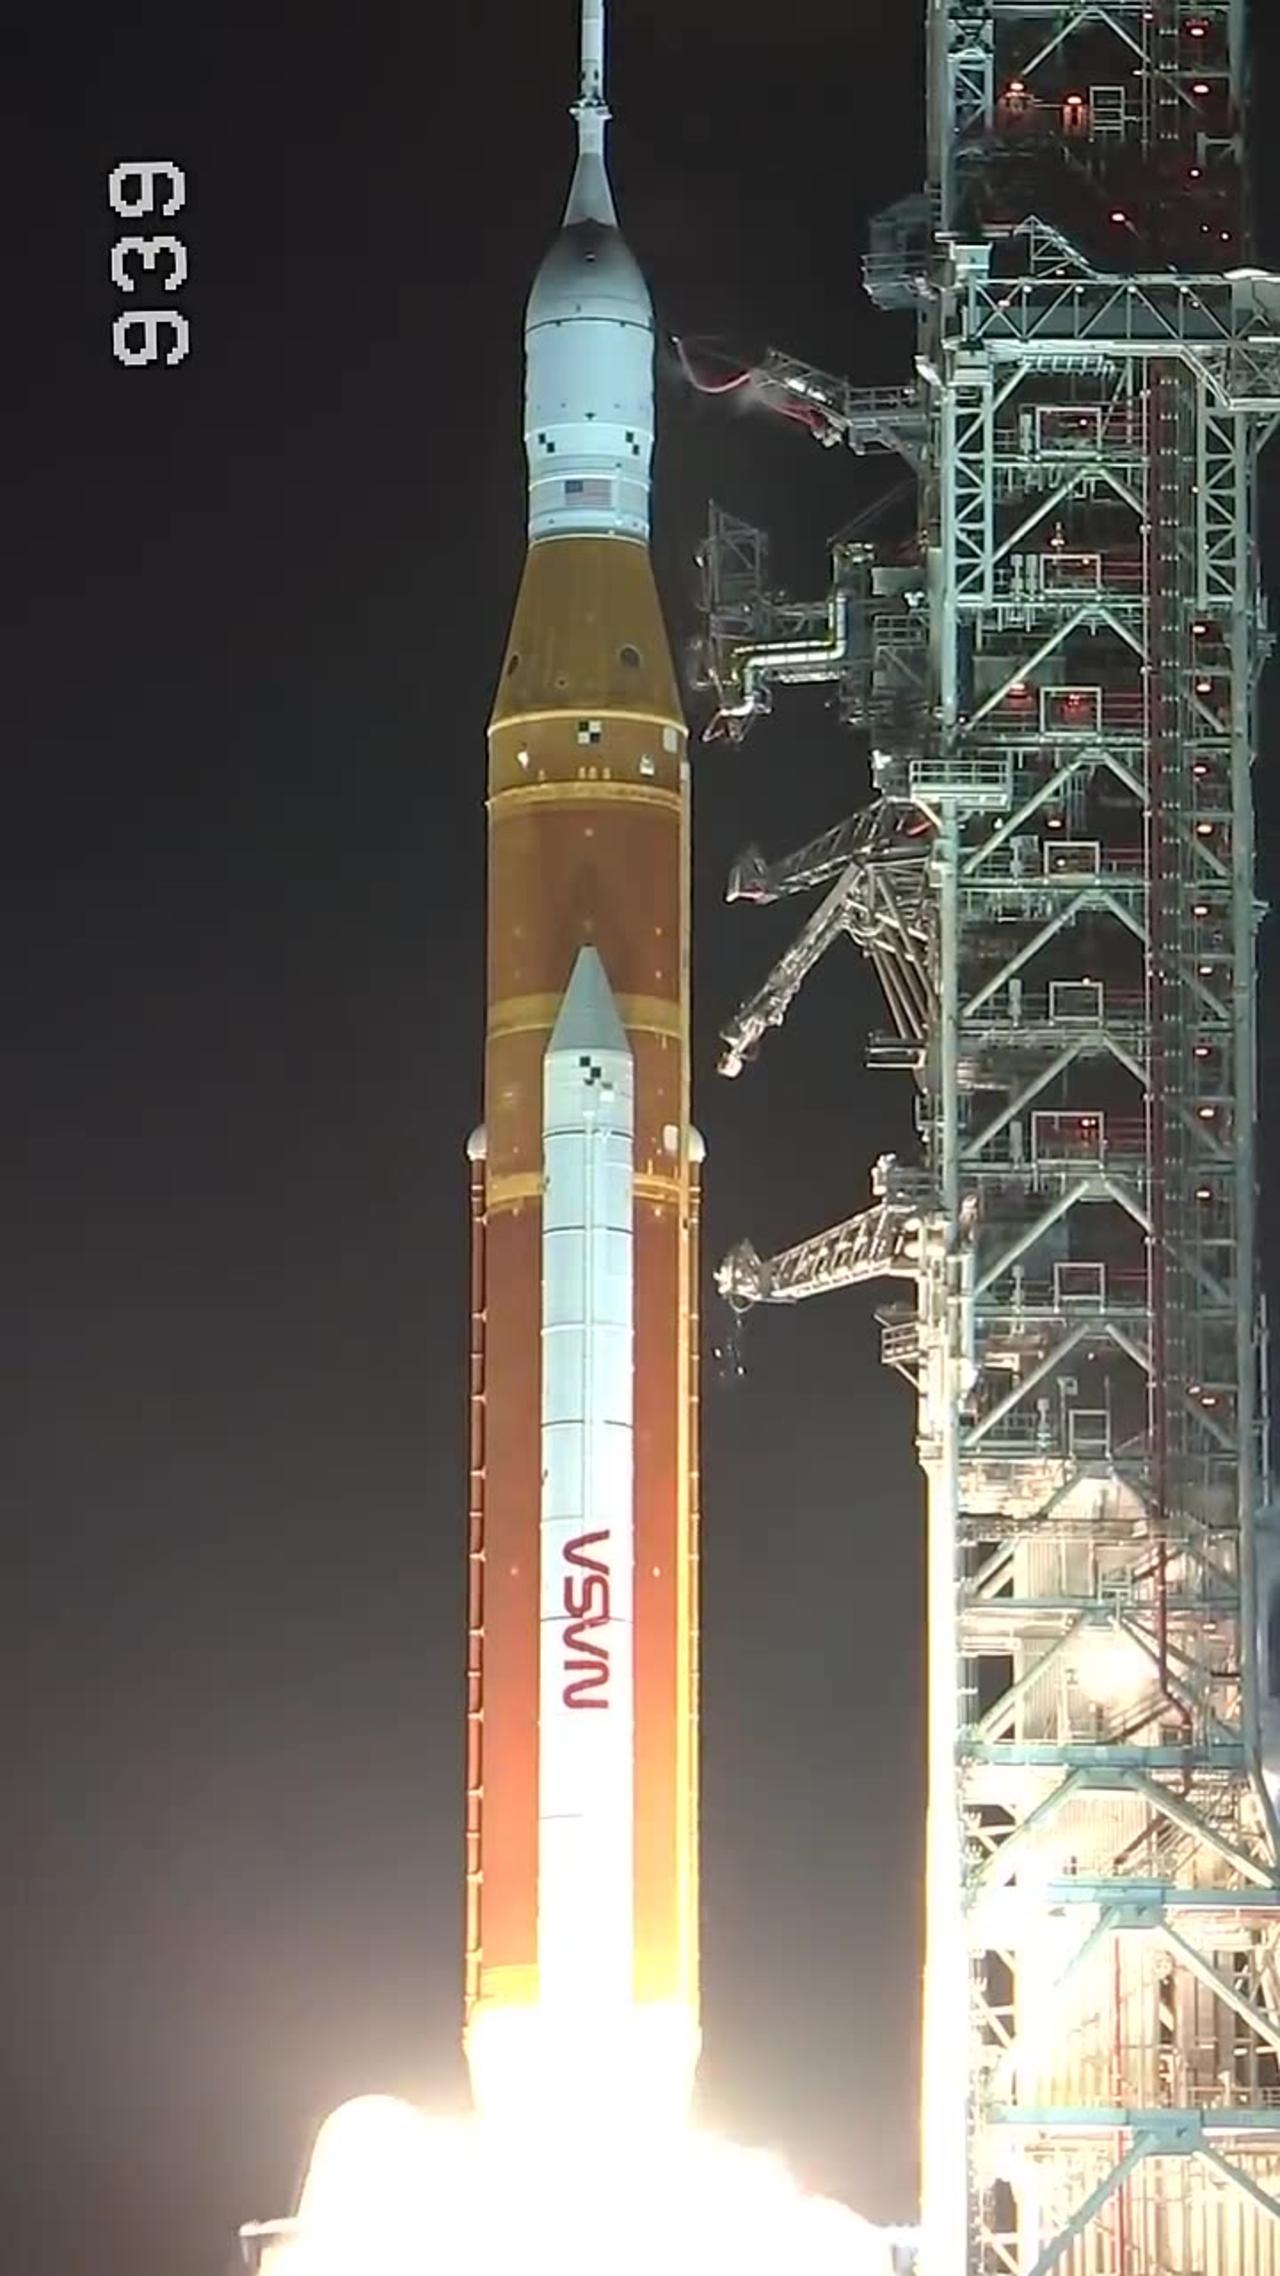 ROCKET LAUNCHED FROM LAUNCHED PAD NASA